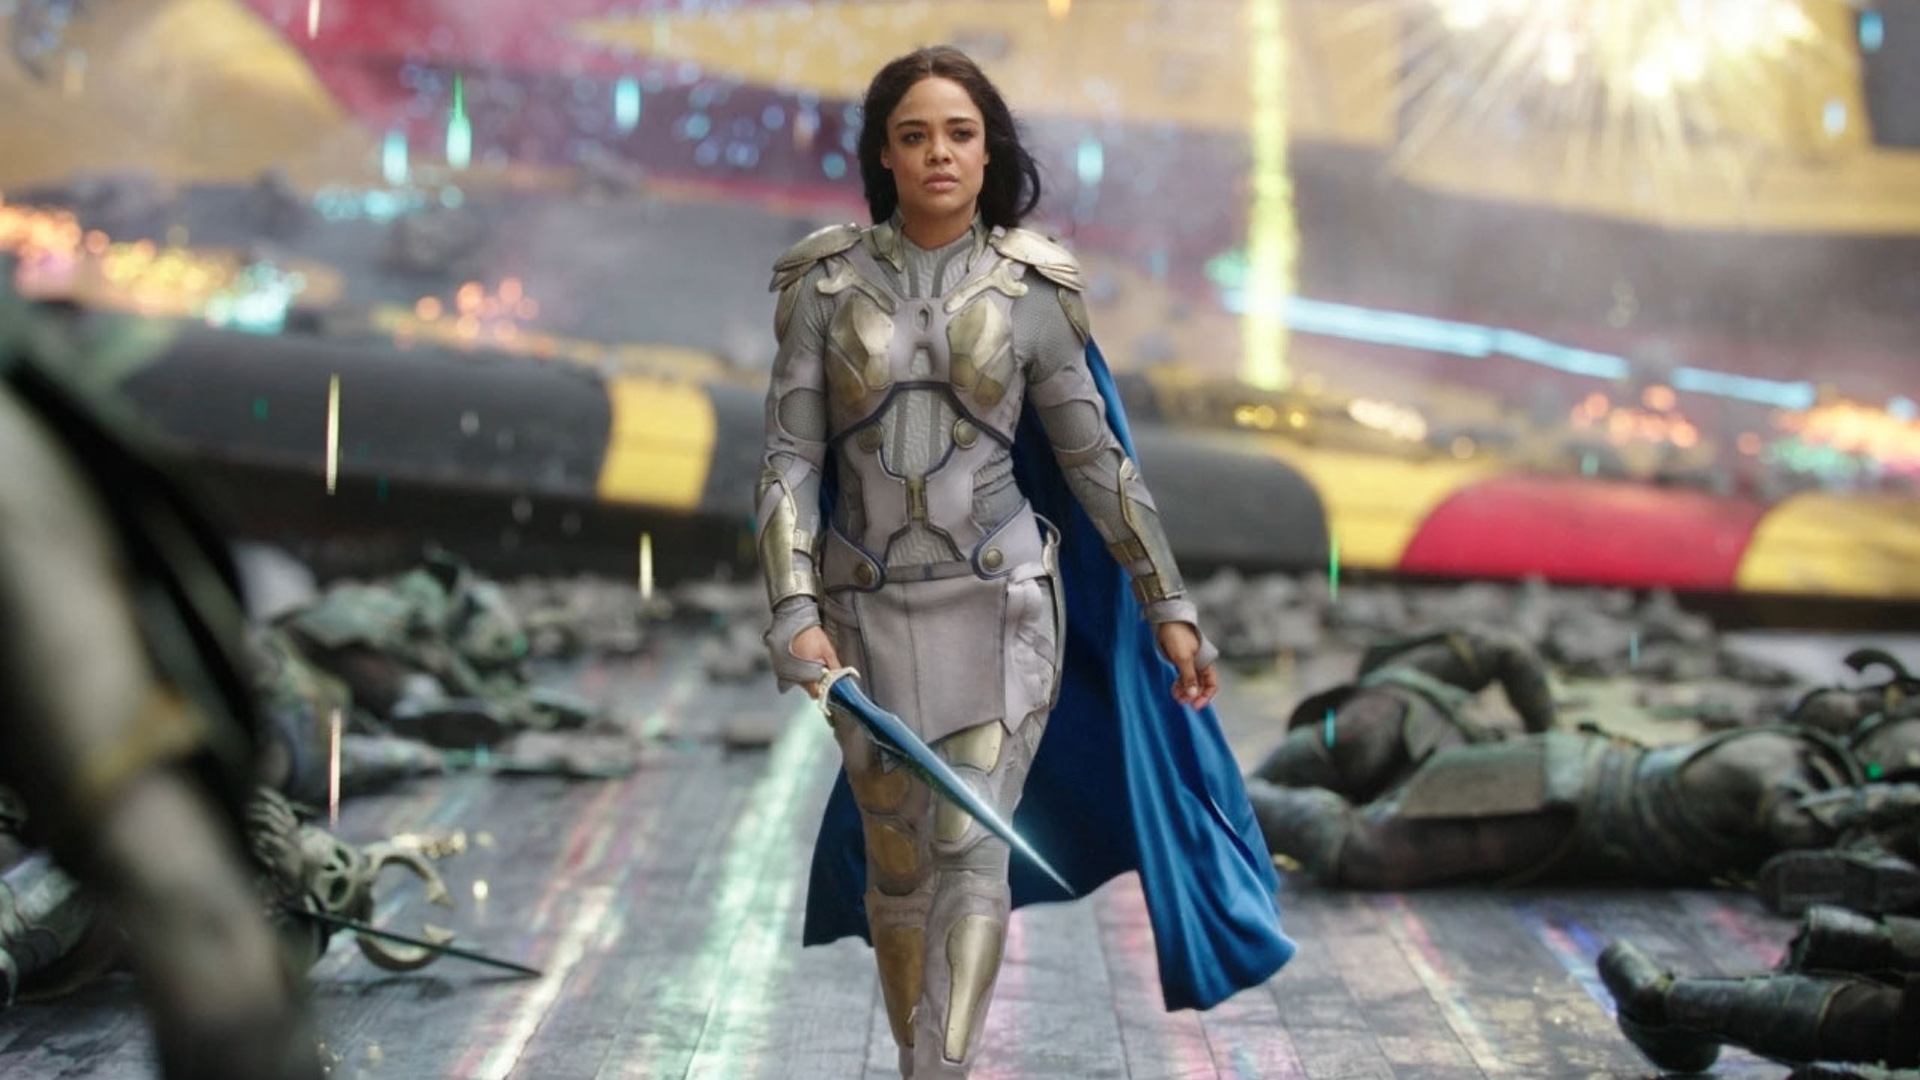 Tessa Thompson Asked Kevin Feige About Developing An All Female Marvel Movie And He Said Yes